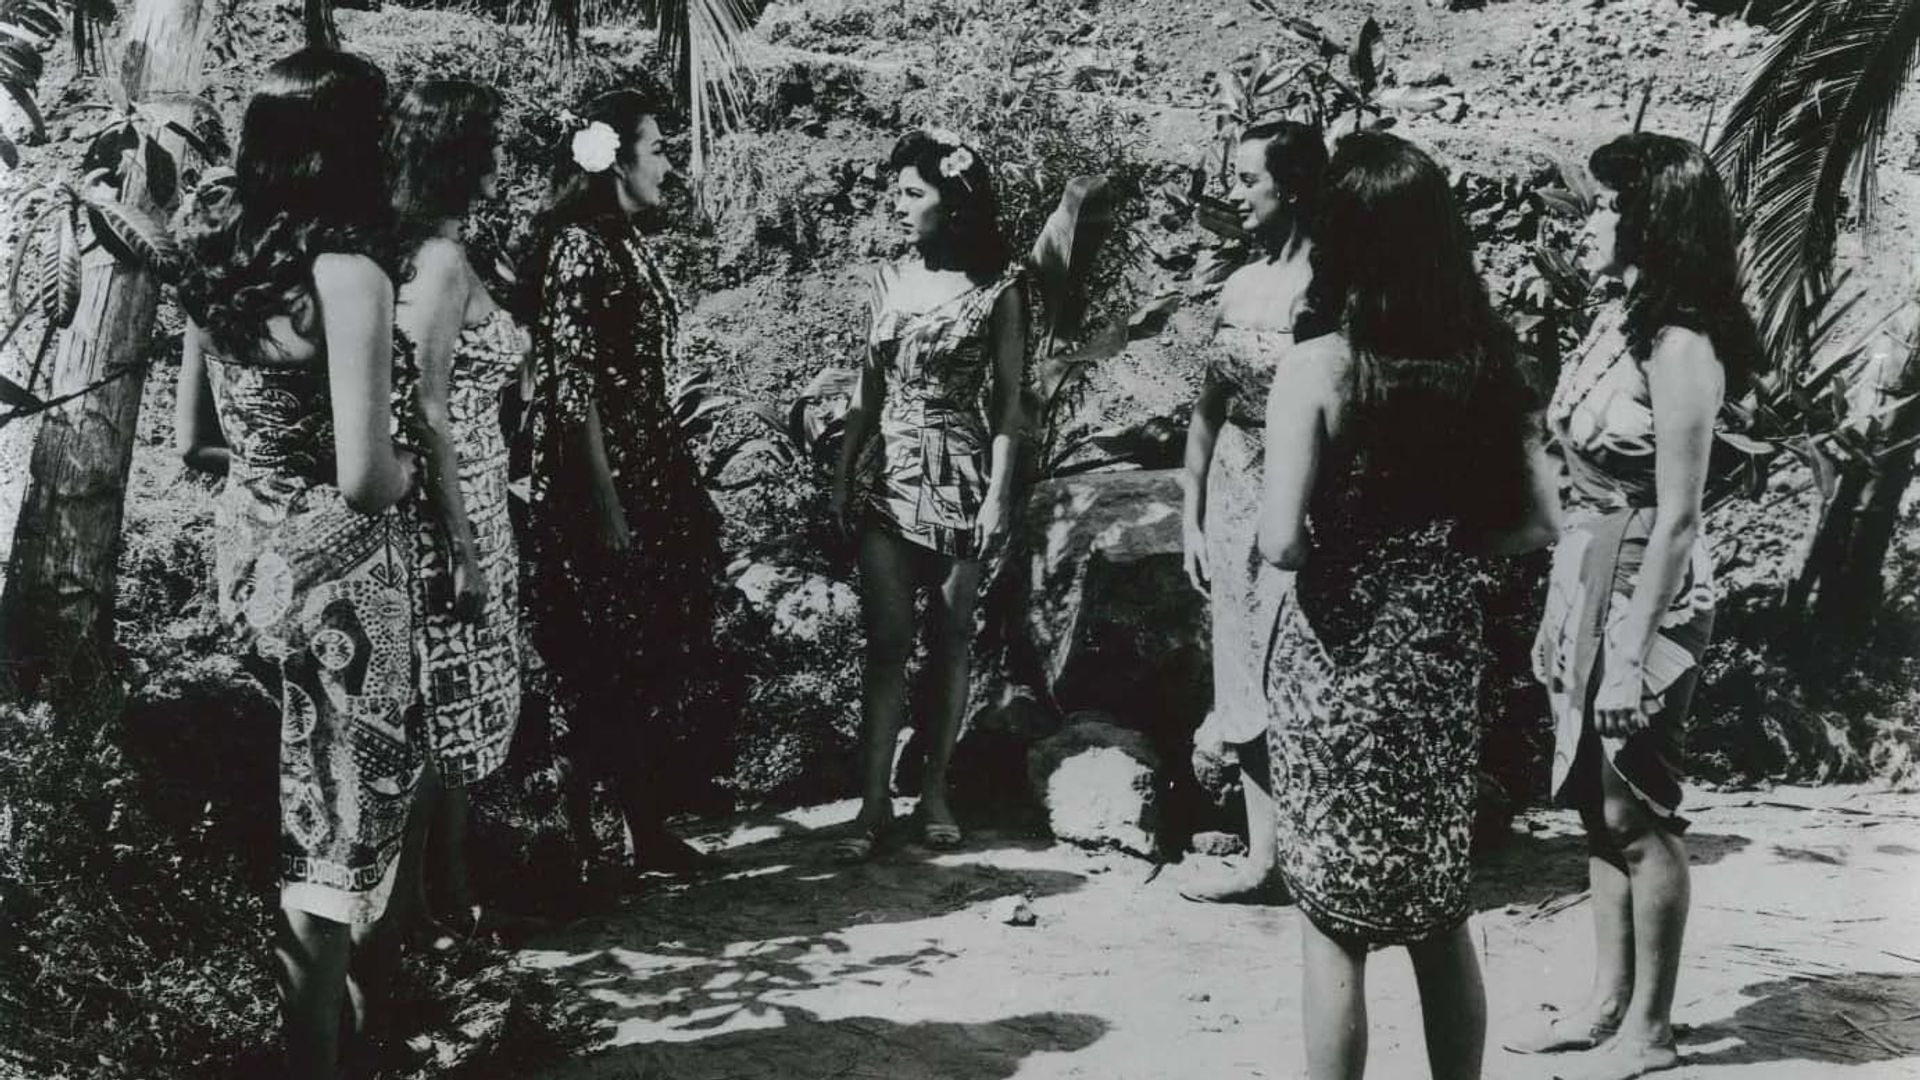 The Women of Pitcairn Island background